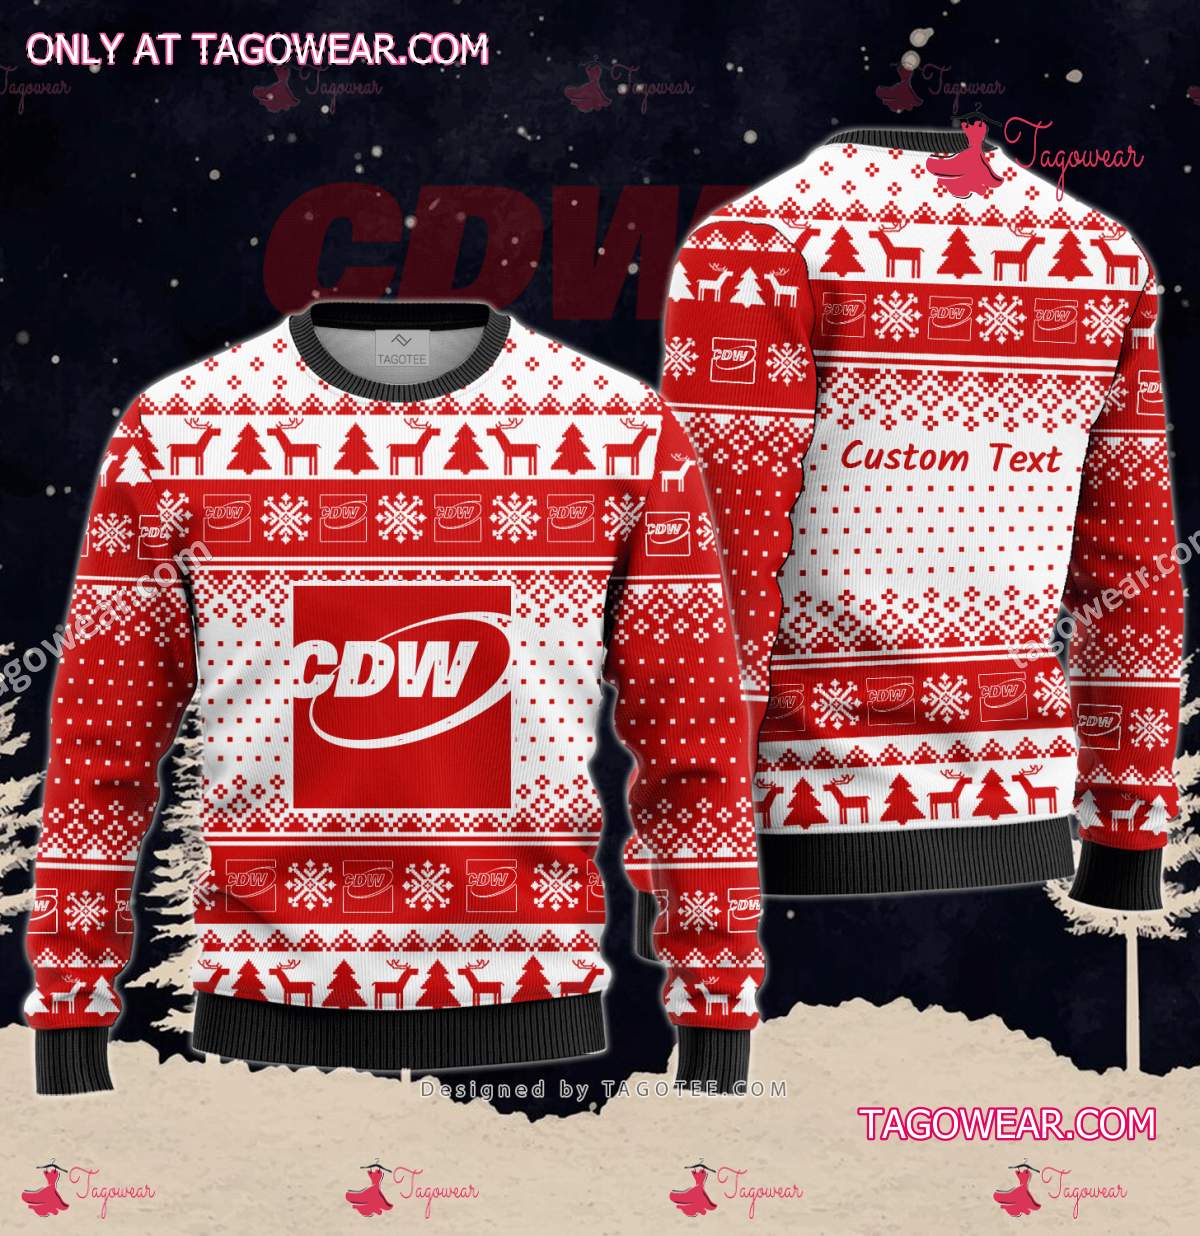 CDW Corporation Ugly Christmas Sweater